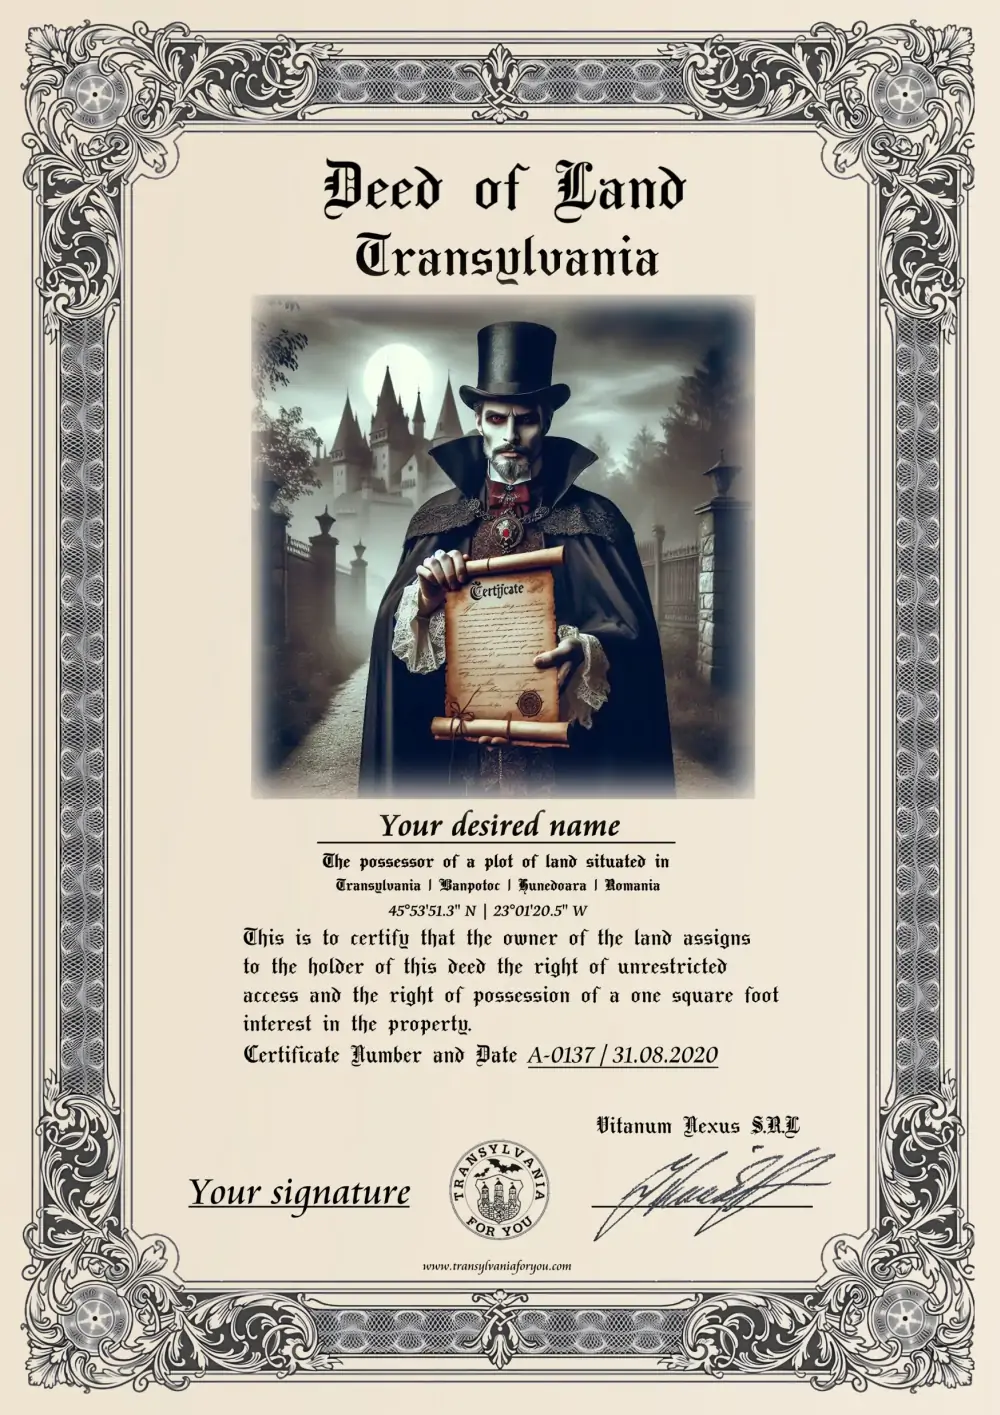 Image on the deed: Count Dracula with certificate